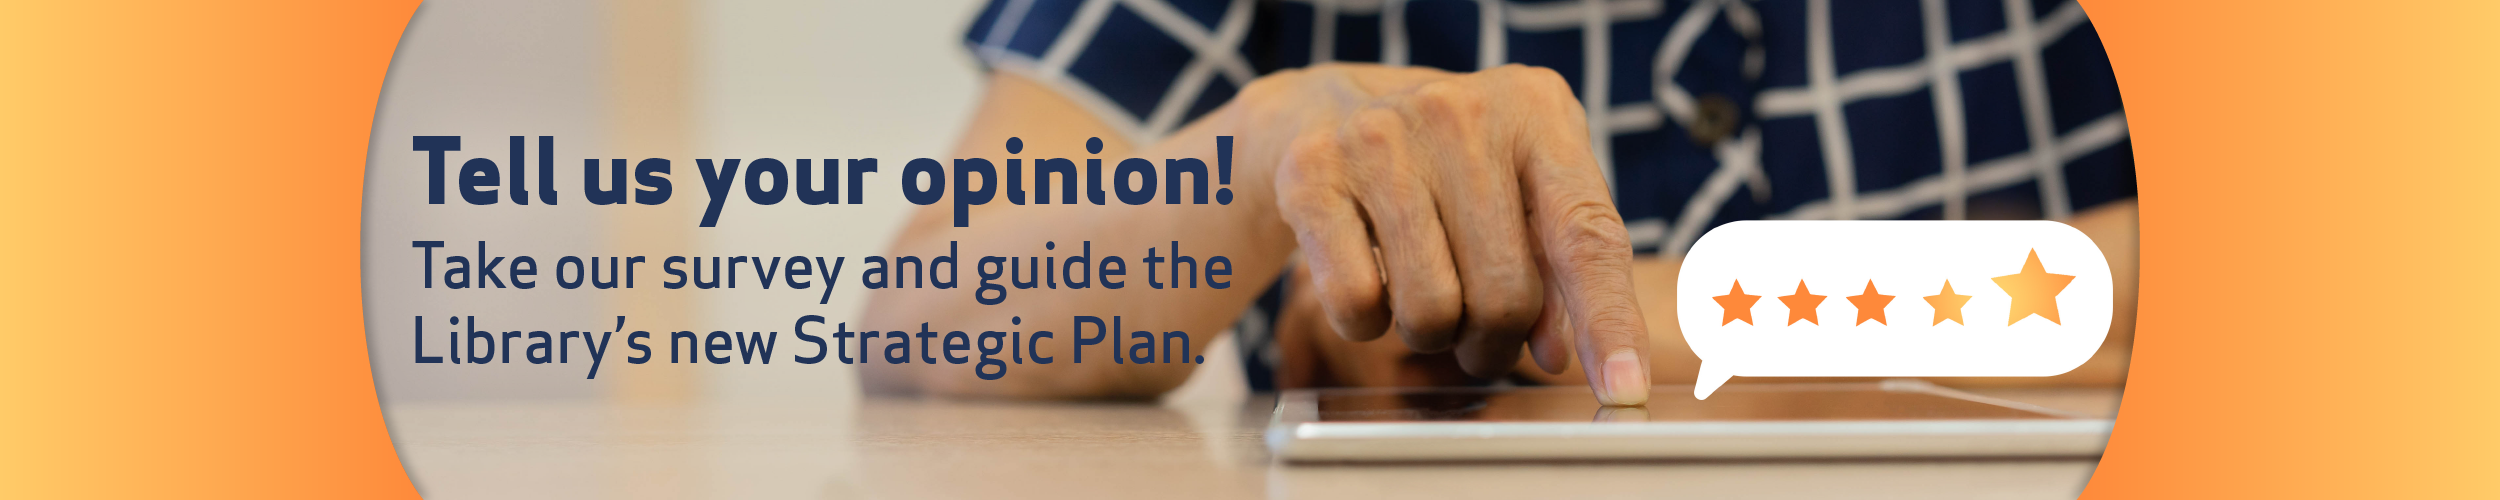 Tell us your opinion! Take our survey and guide the Library's new Strategic Plan!